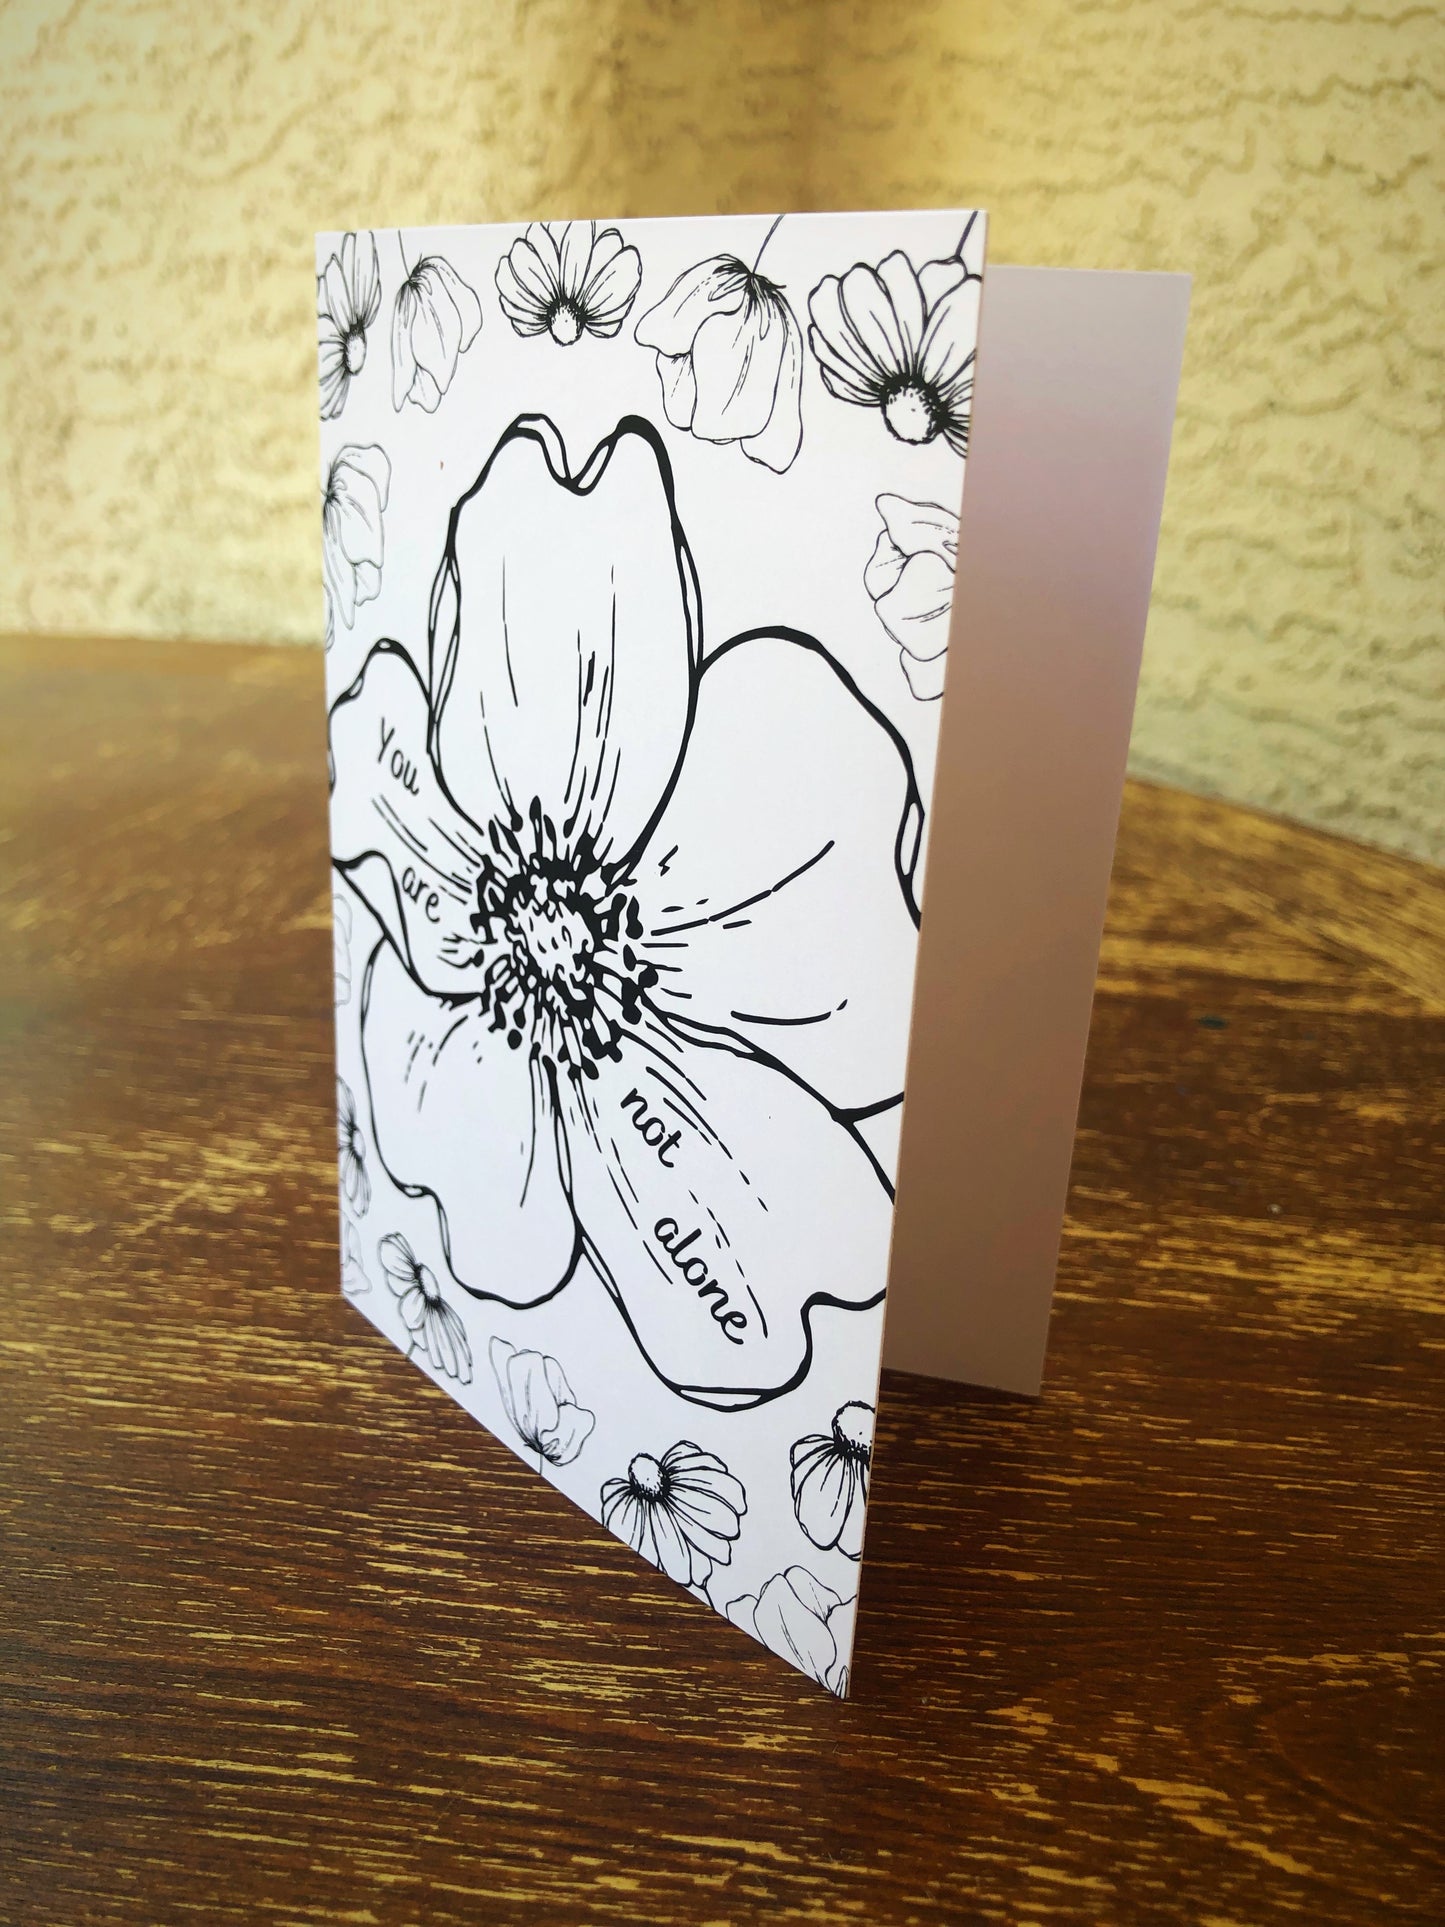 Greeting Cards - 4 card bundle - Condolence, Inspiration and Love